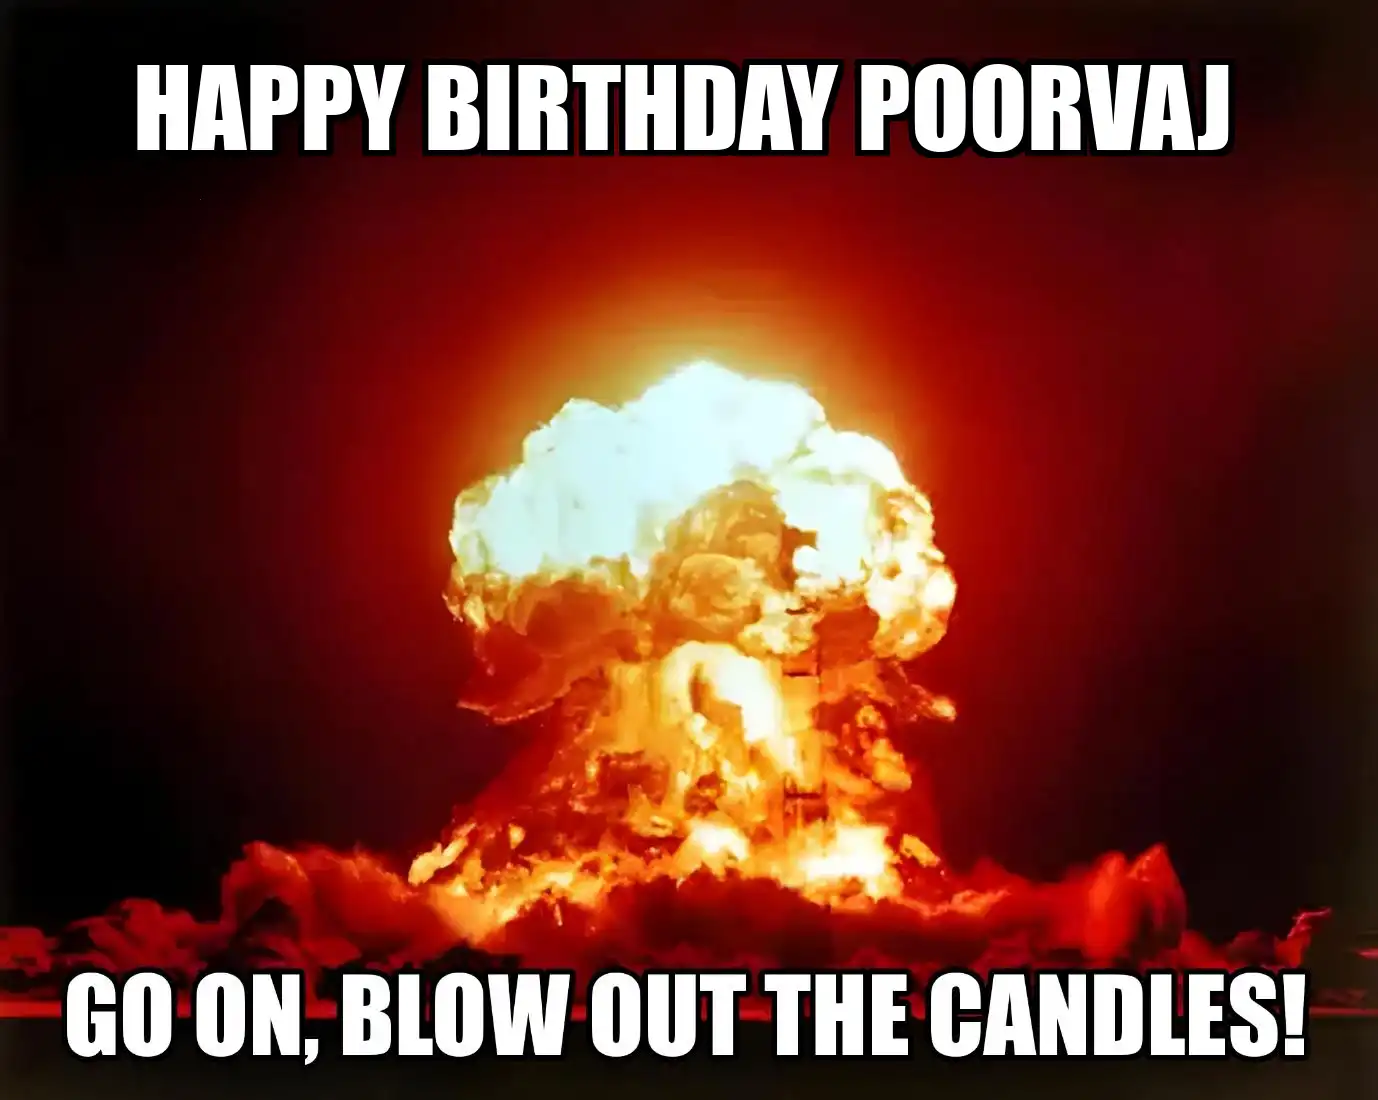 Happy Birthday Poorvaj Go On Blow Out The Candles Meme